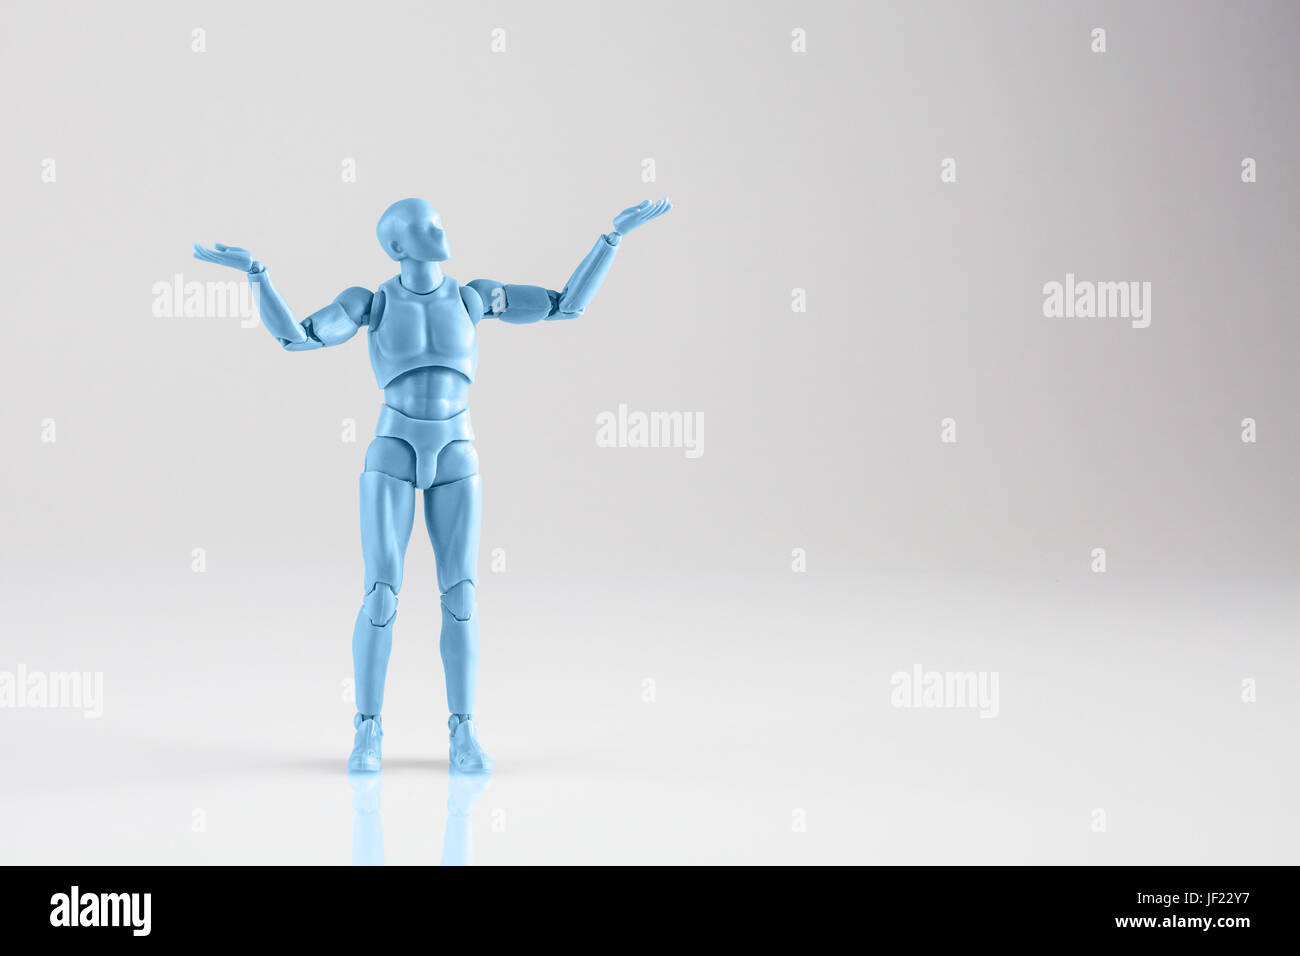 Blue male figurine standing isolated on white reflective background with both hands up. Trying to make a decision concept with copy space Stock Photo